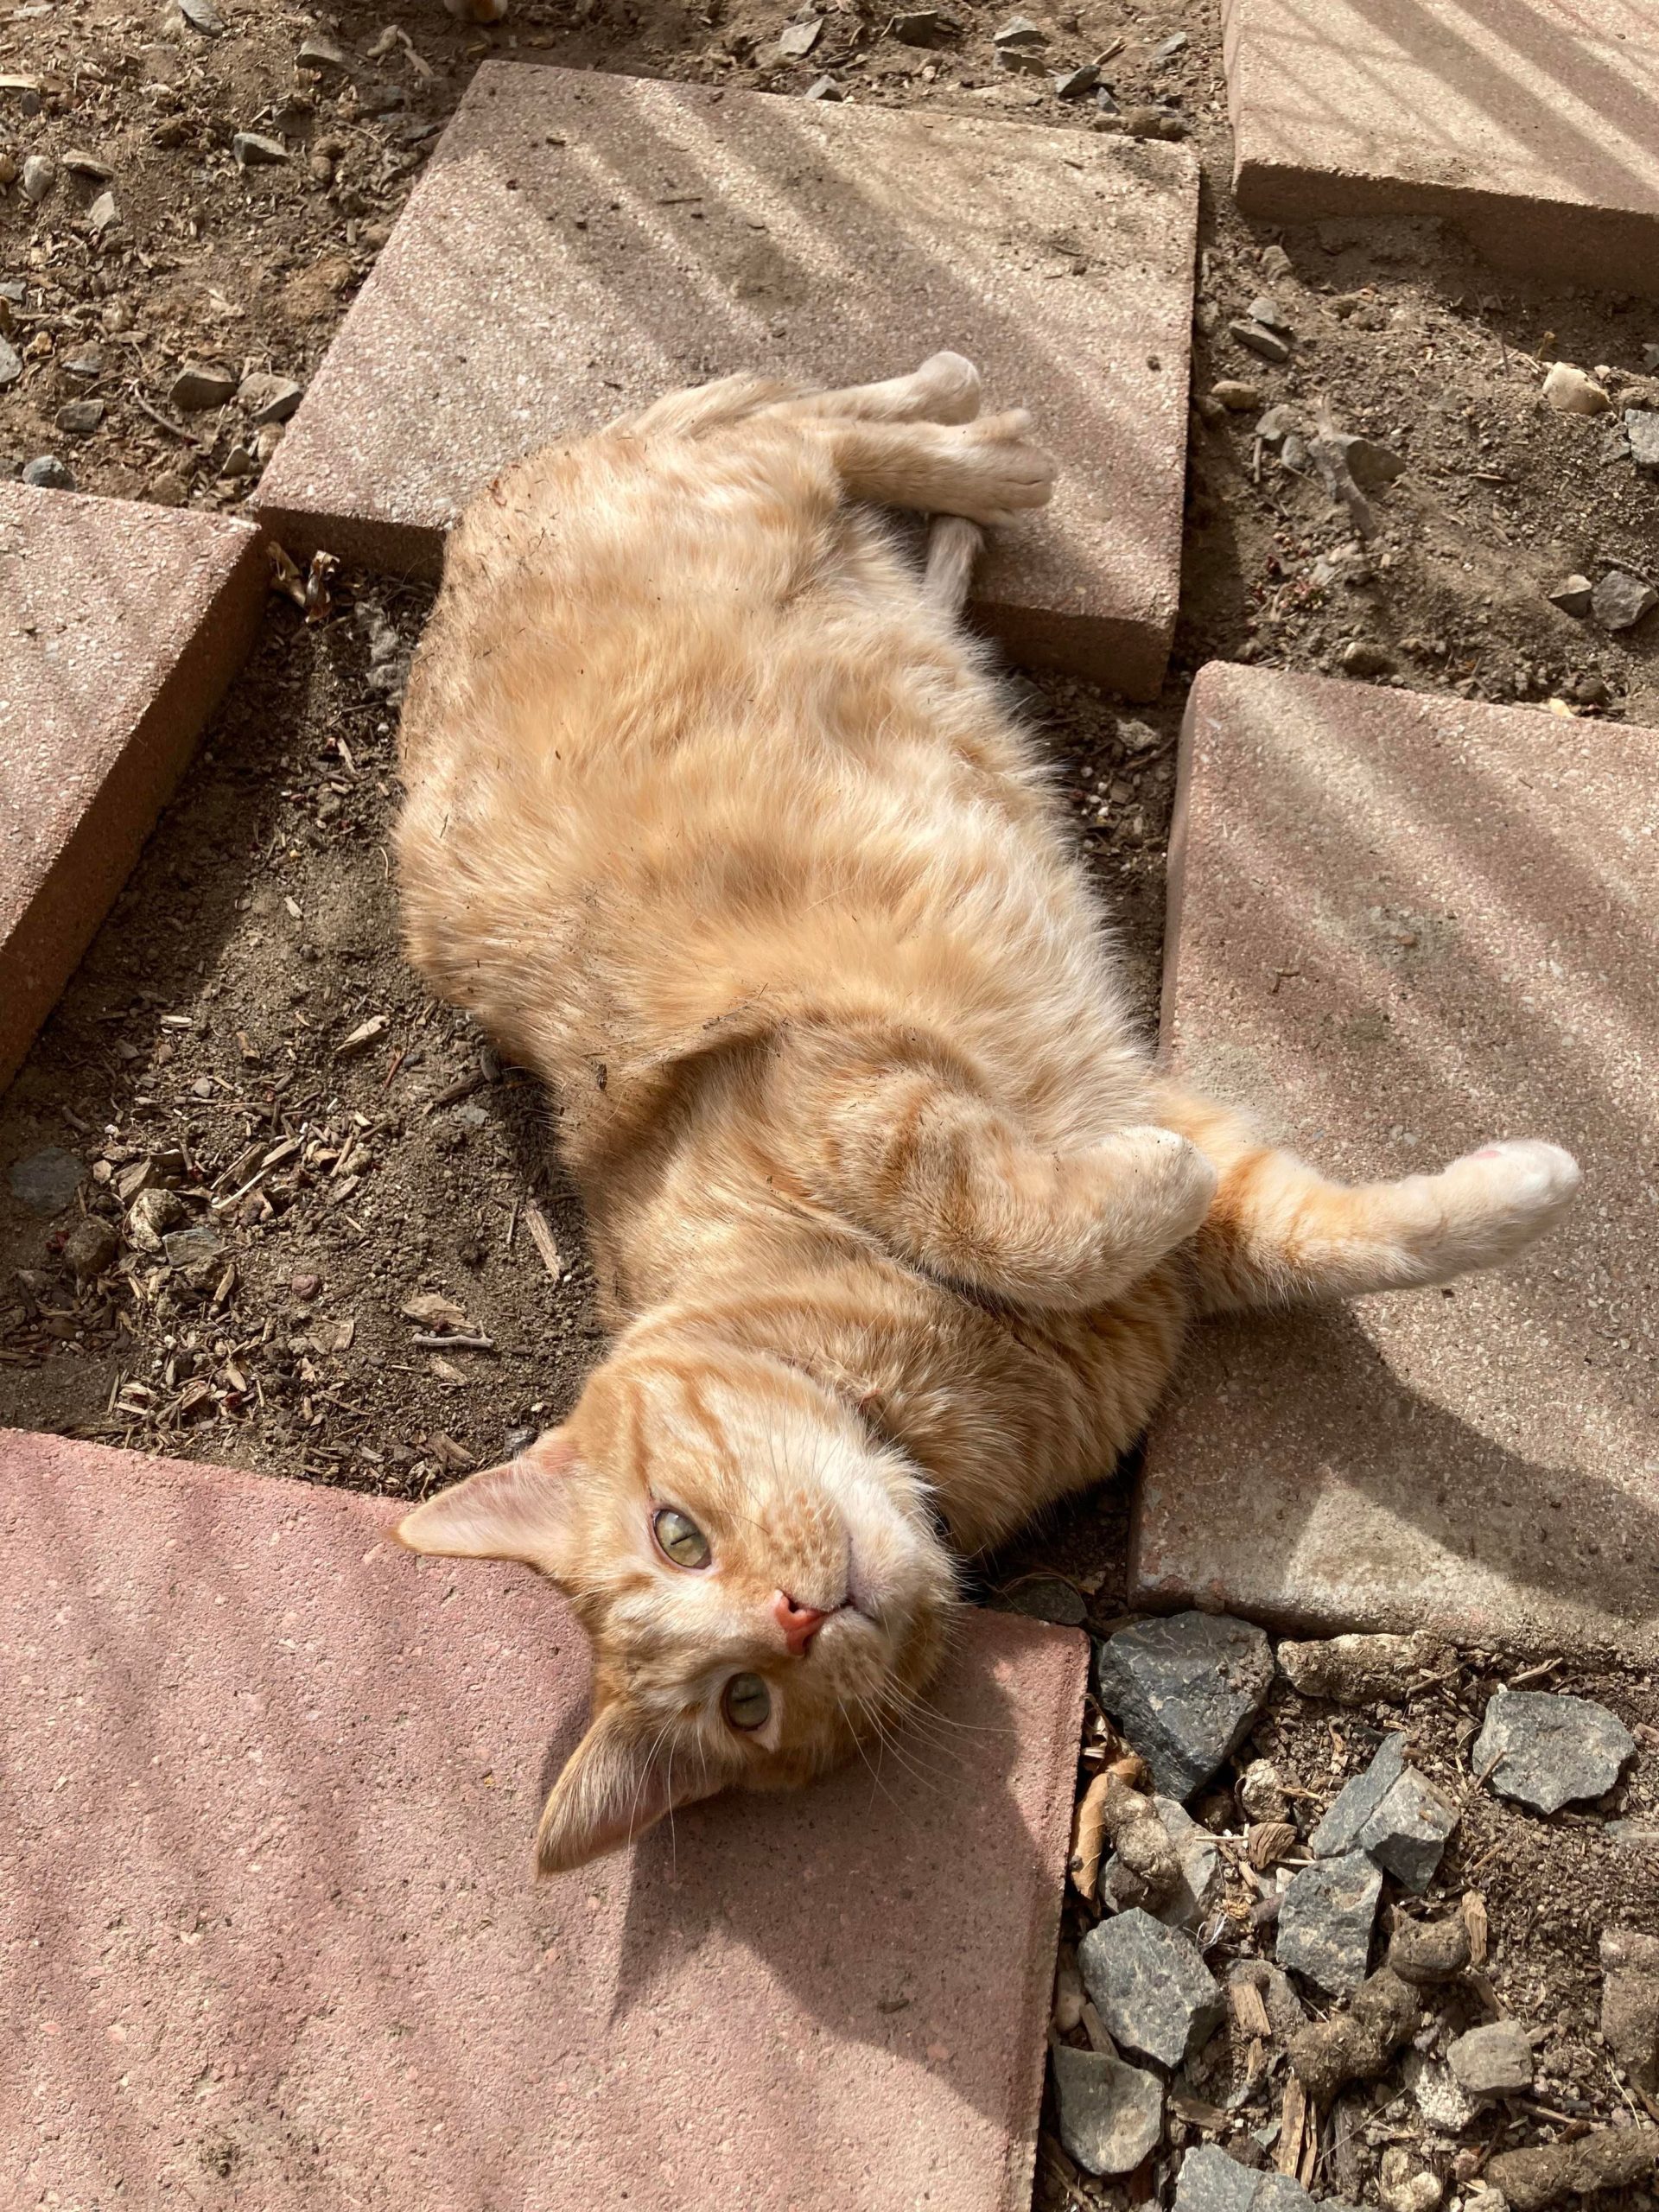 A orange tabby cat lays outside near some red paving stones.